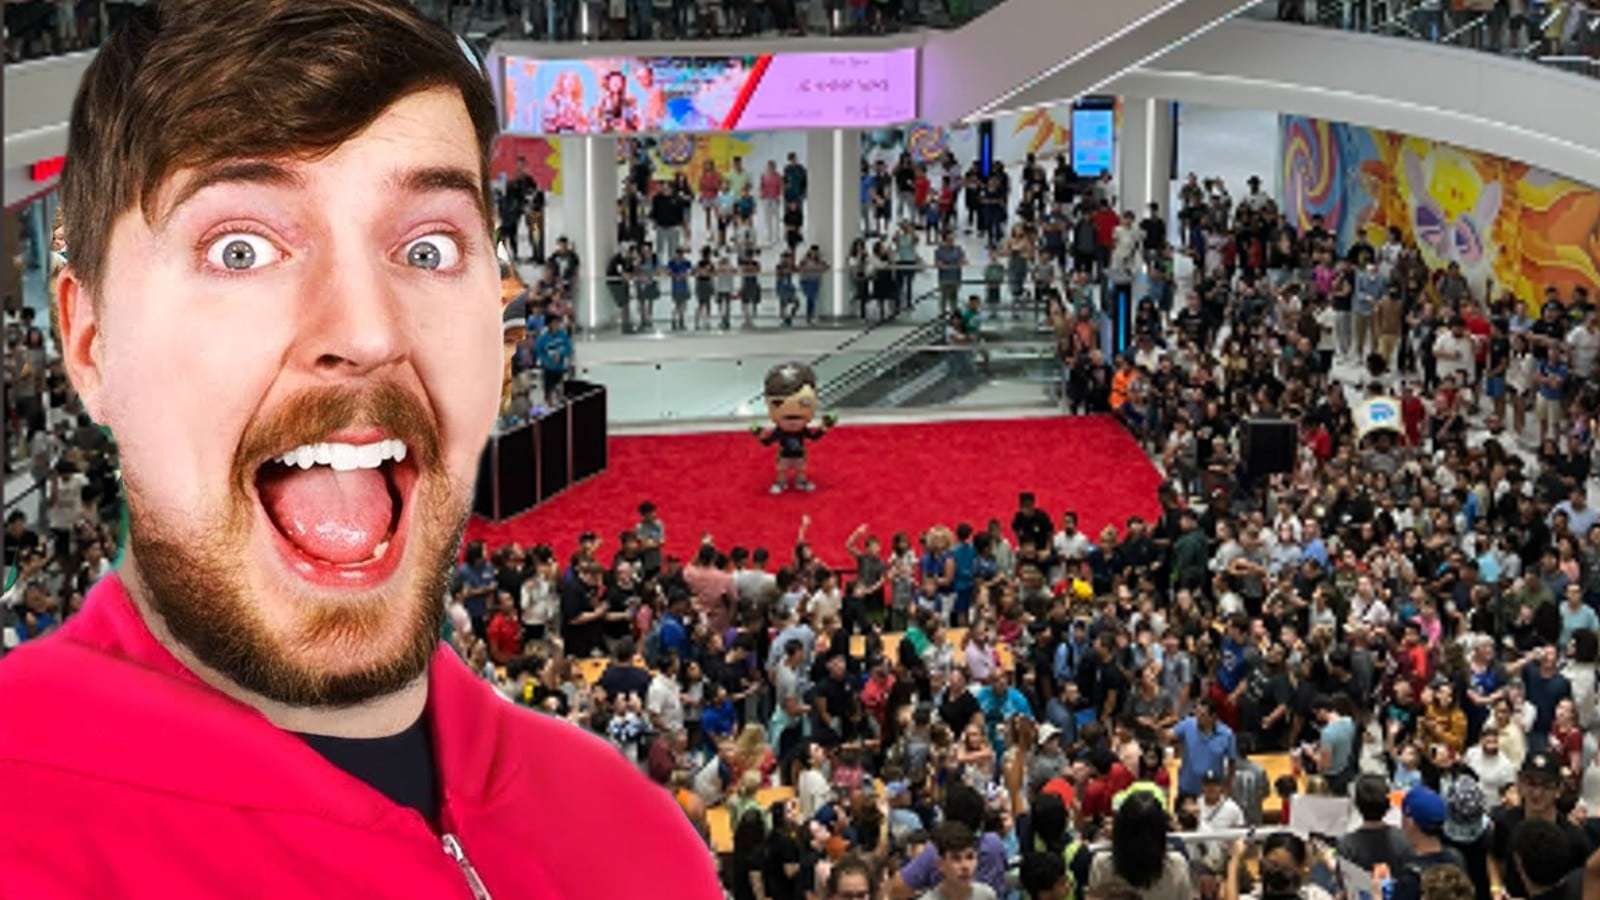 MrBeast smiling in front of large crowds at MrBeast Burger restaurant opening